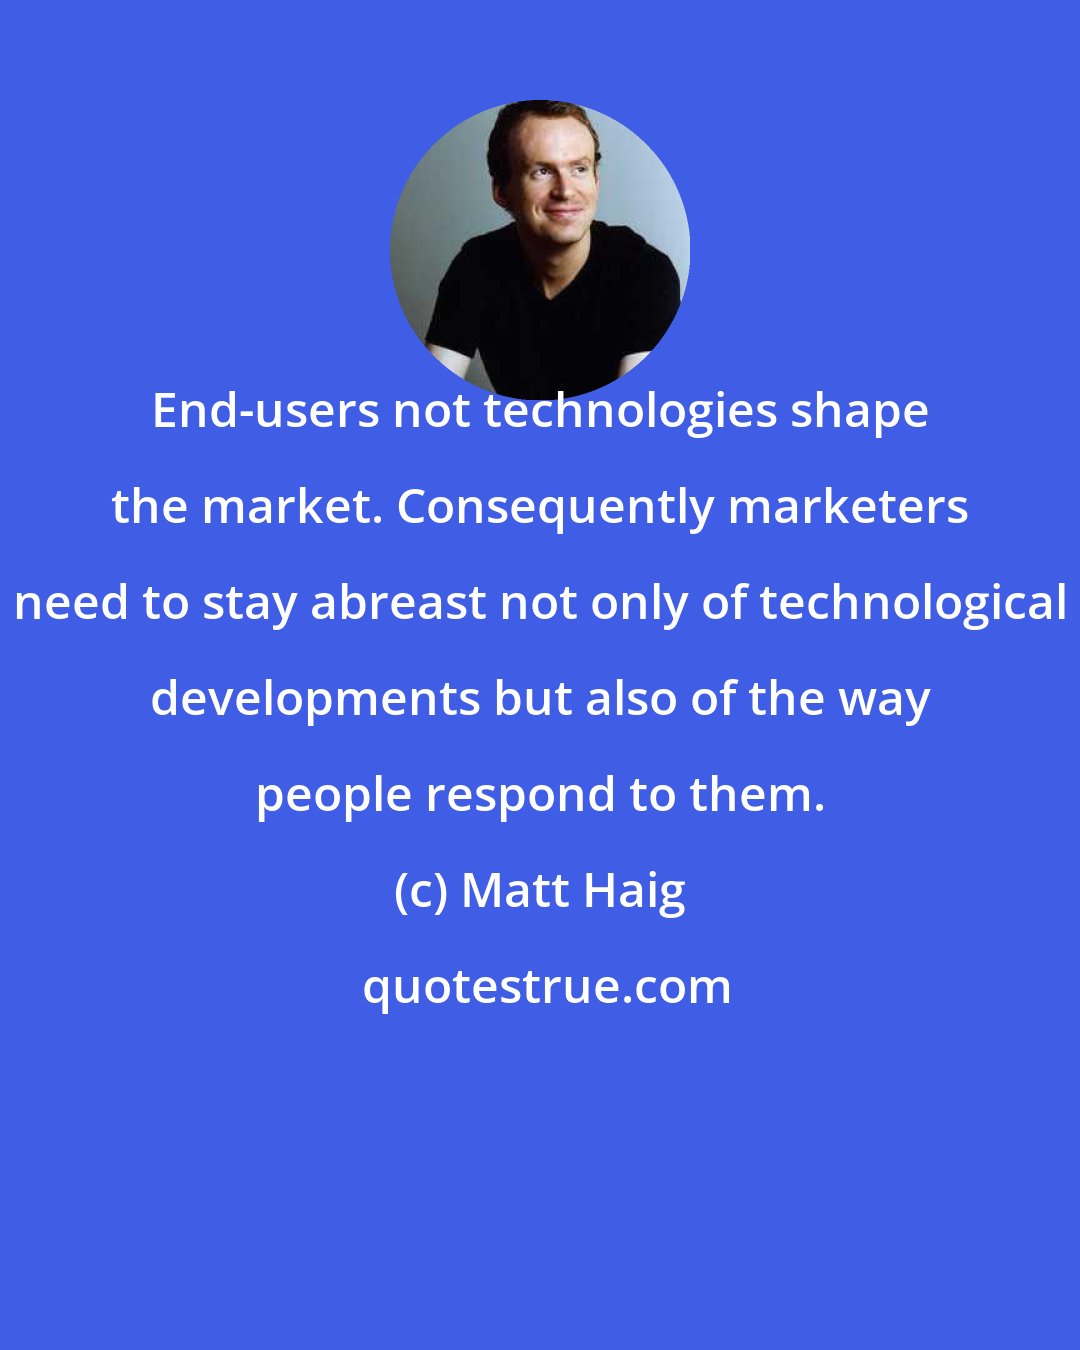 Matt Haig: End-users not technologies shape the market. Consequently marketers need to stay abreast not only of technological developments but also of the way people respond to them.